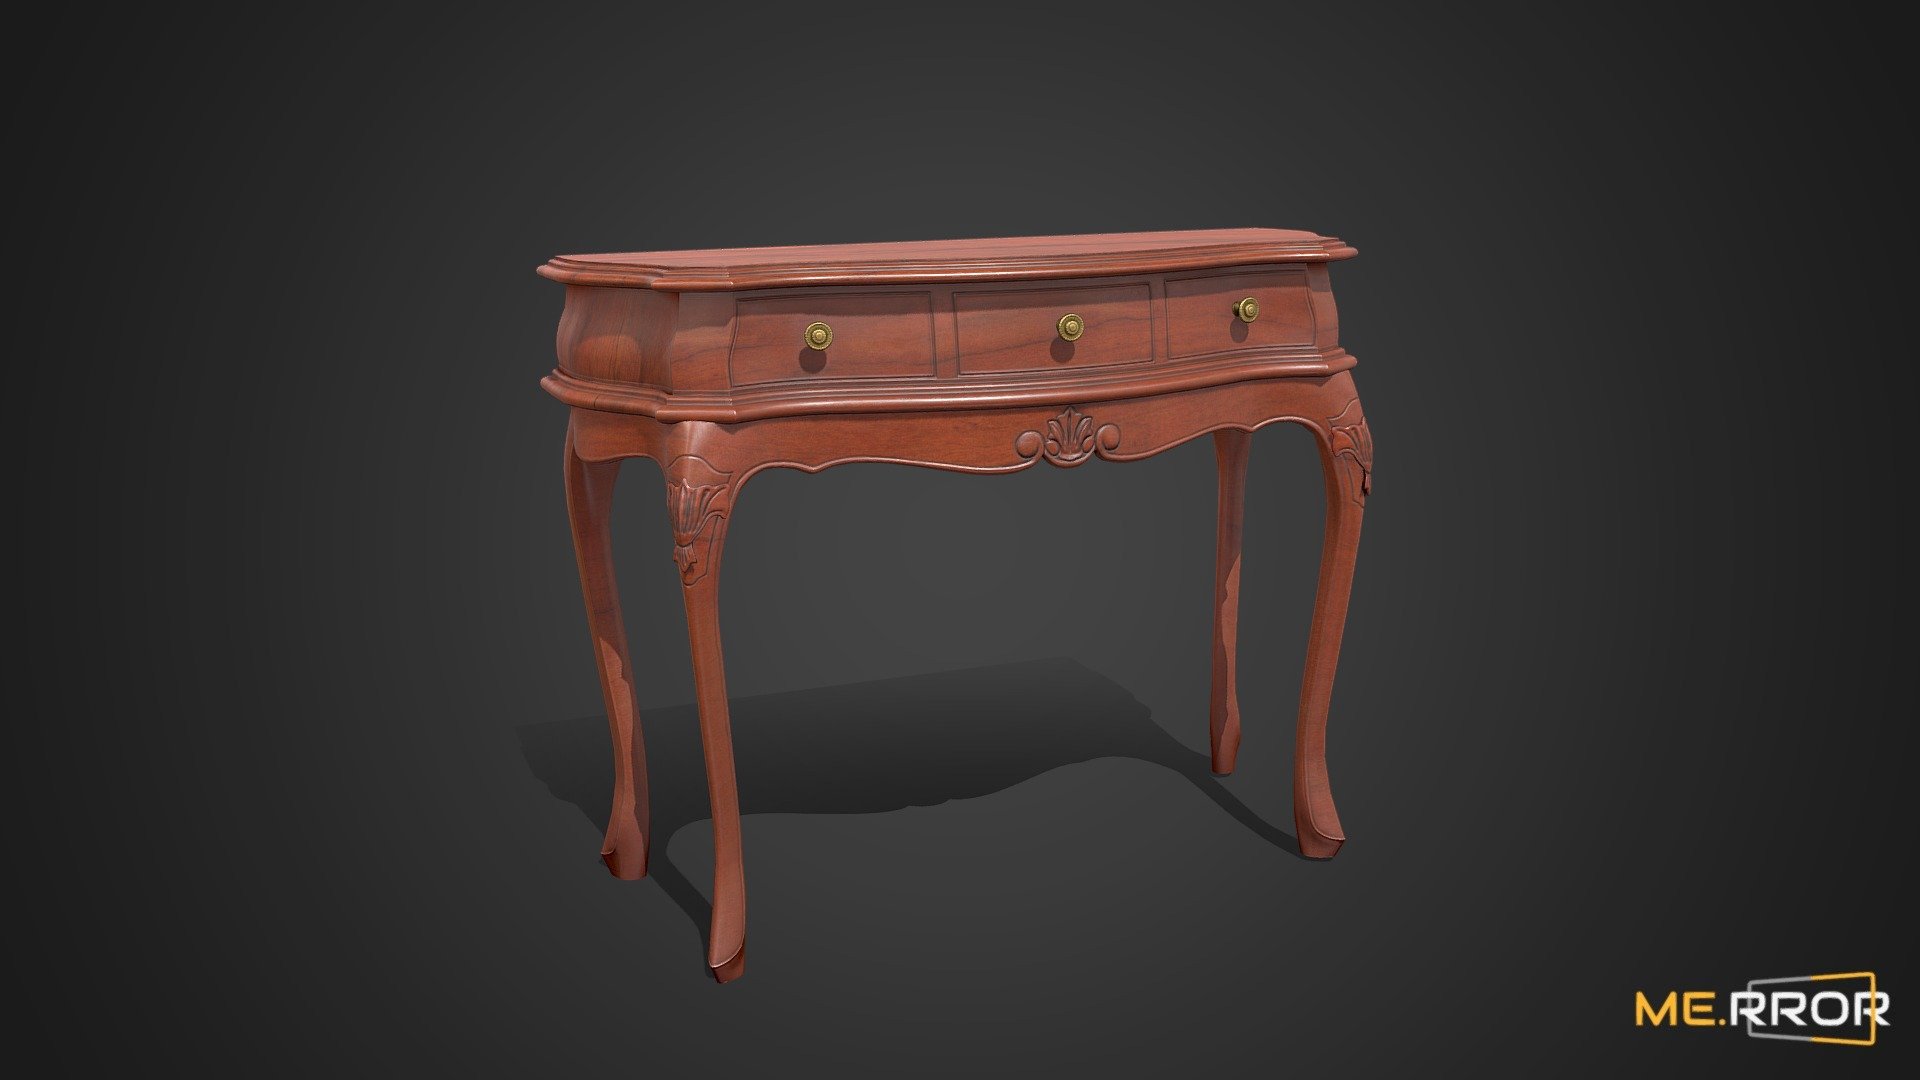 MERROR is a 3D Content PLATFORM which introduces various Asian assets to the 3D world


3DScanning #Photogrametry #ME.RROR - [Game-Ready] Wood Desk - Buy Royalty Free 3D model by ME.RROR Studio (@merror) 3d model